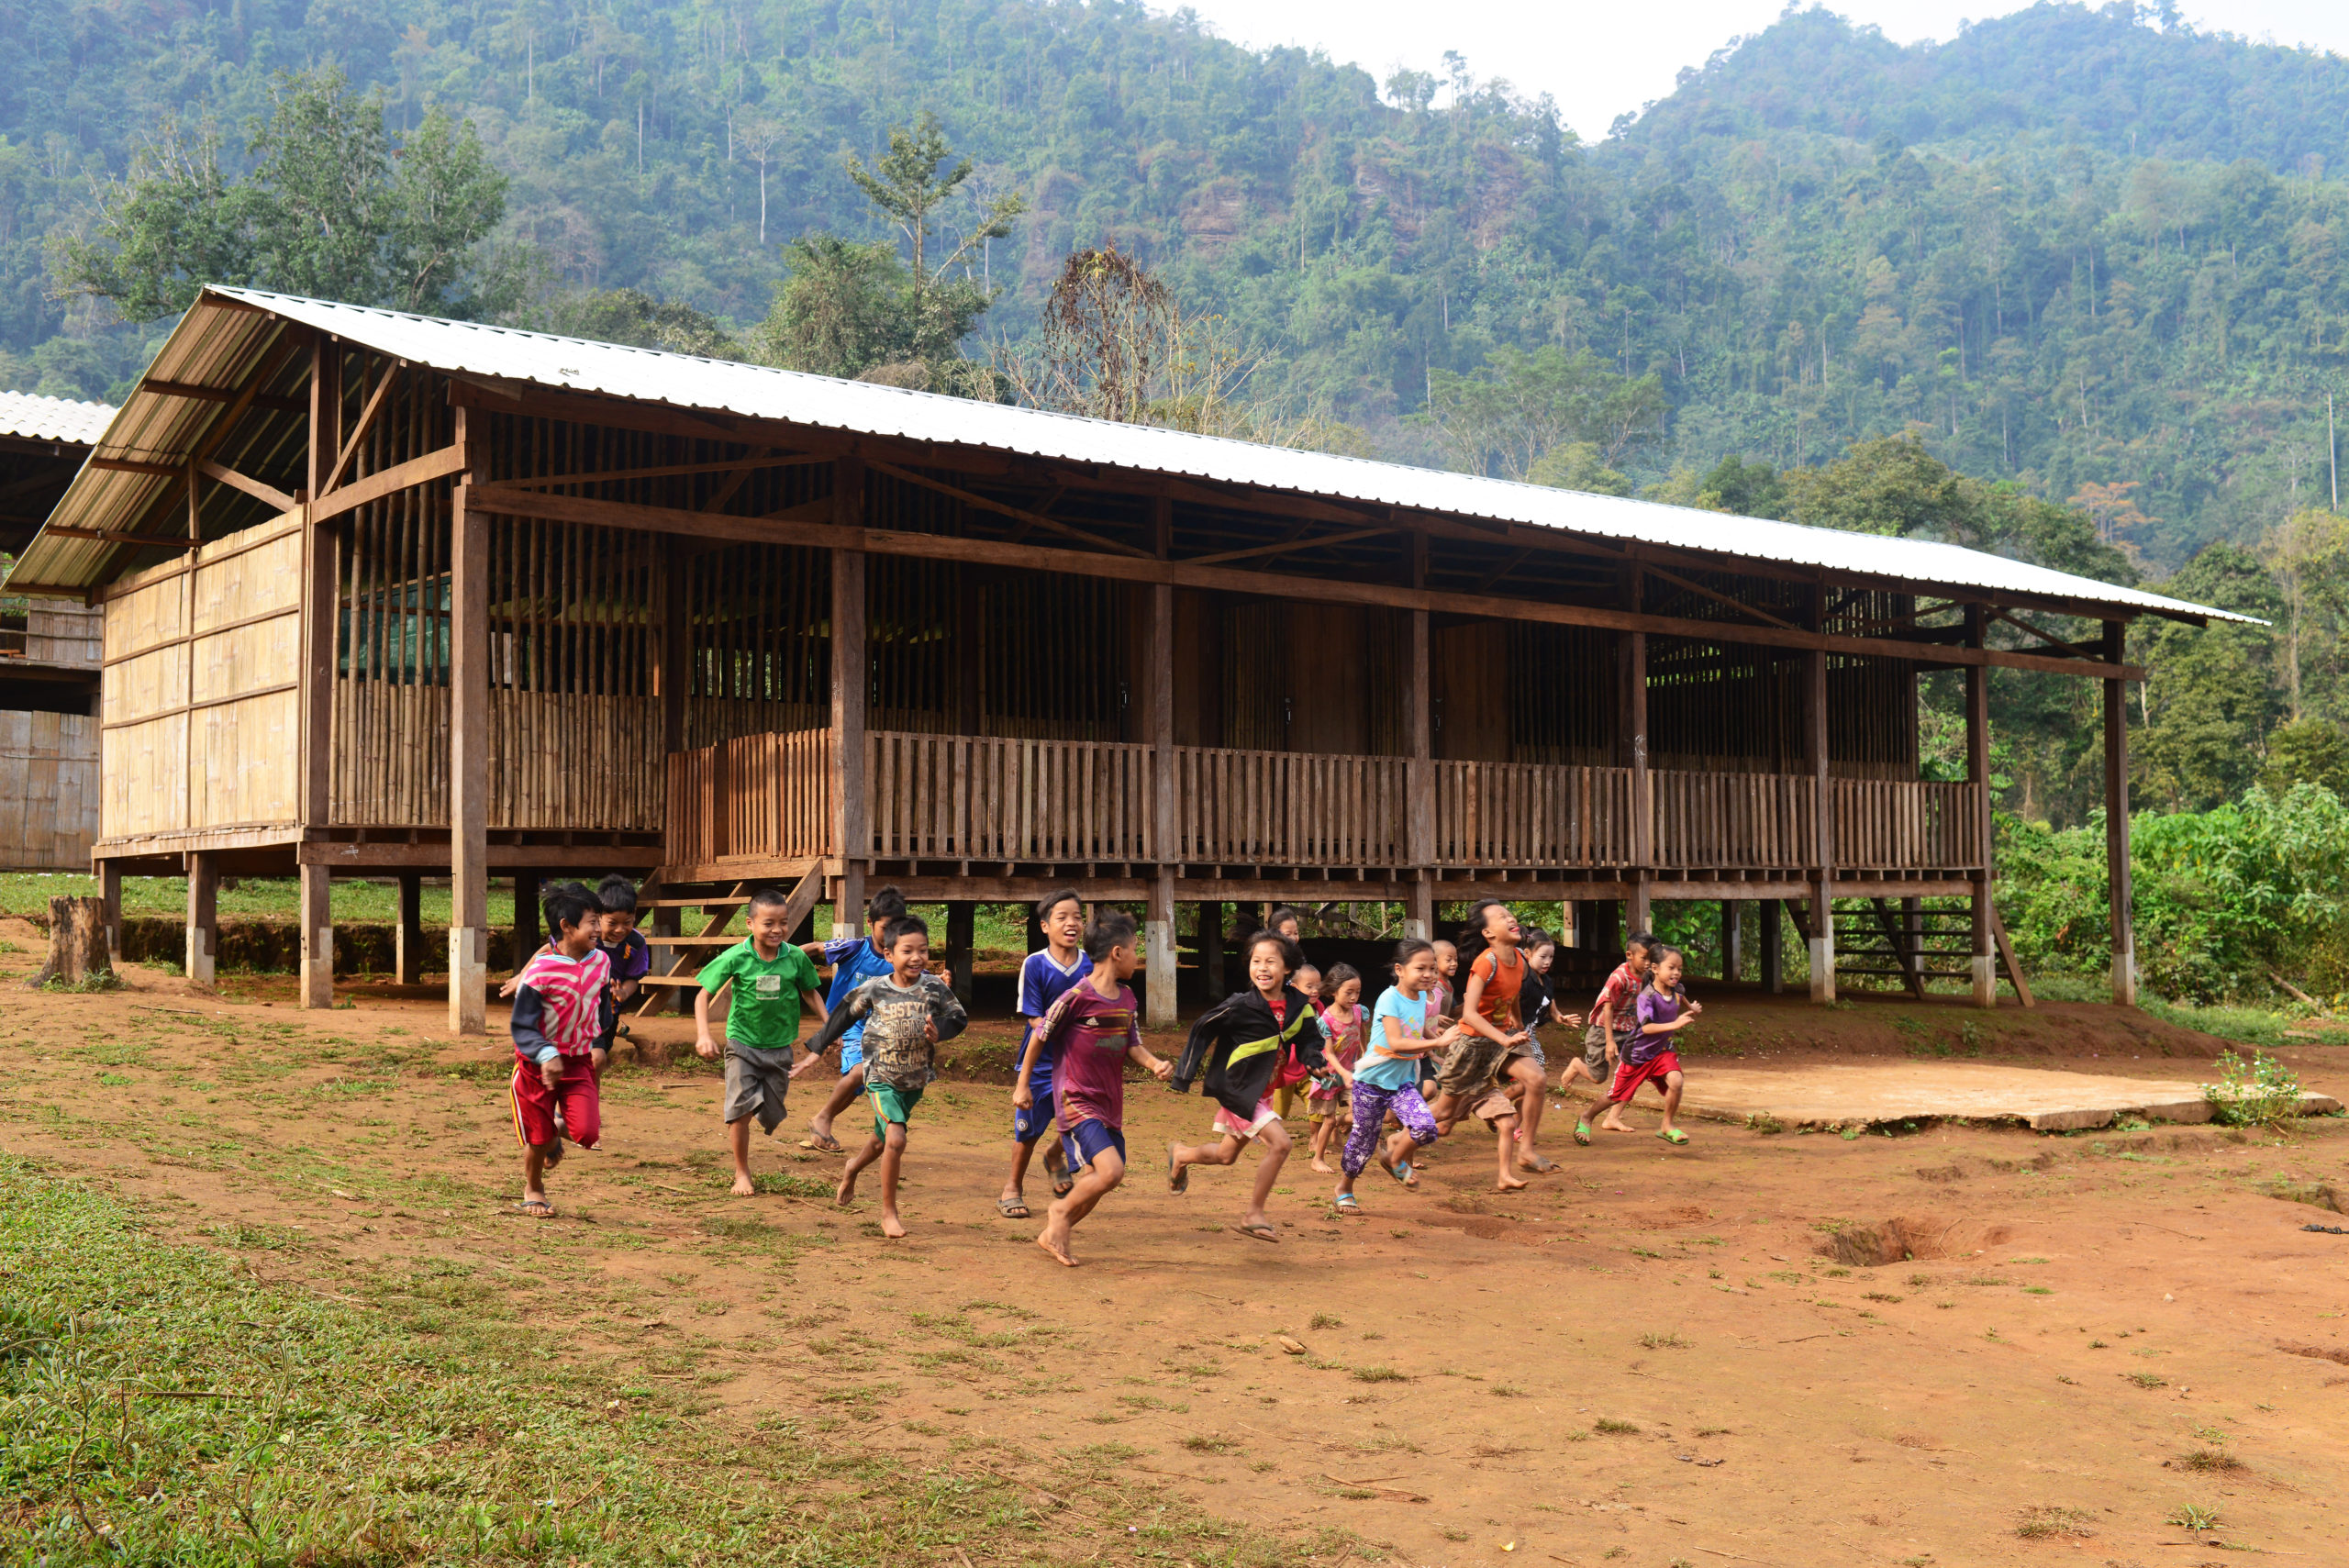 Children running in front of Klay Poe Klo Primary School. Klay Poe Klo Primary school is the first project designed for Gyaw Gyaw by Jae-Young Lee. The first phase contains of two classrooms and a library. It is a timber building with bamboo walls. The design is based on traditional Karen techniques and materials but strengthened and given a functional and climate adjusted design for better use over time. Photograph by Vincenzo Floramo